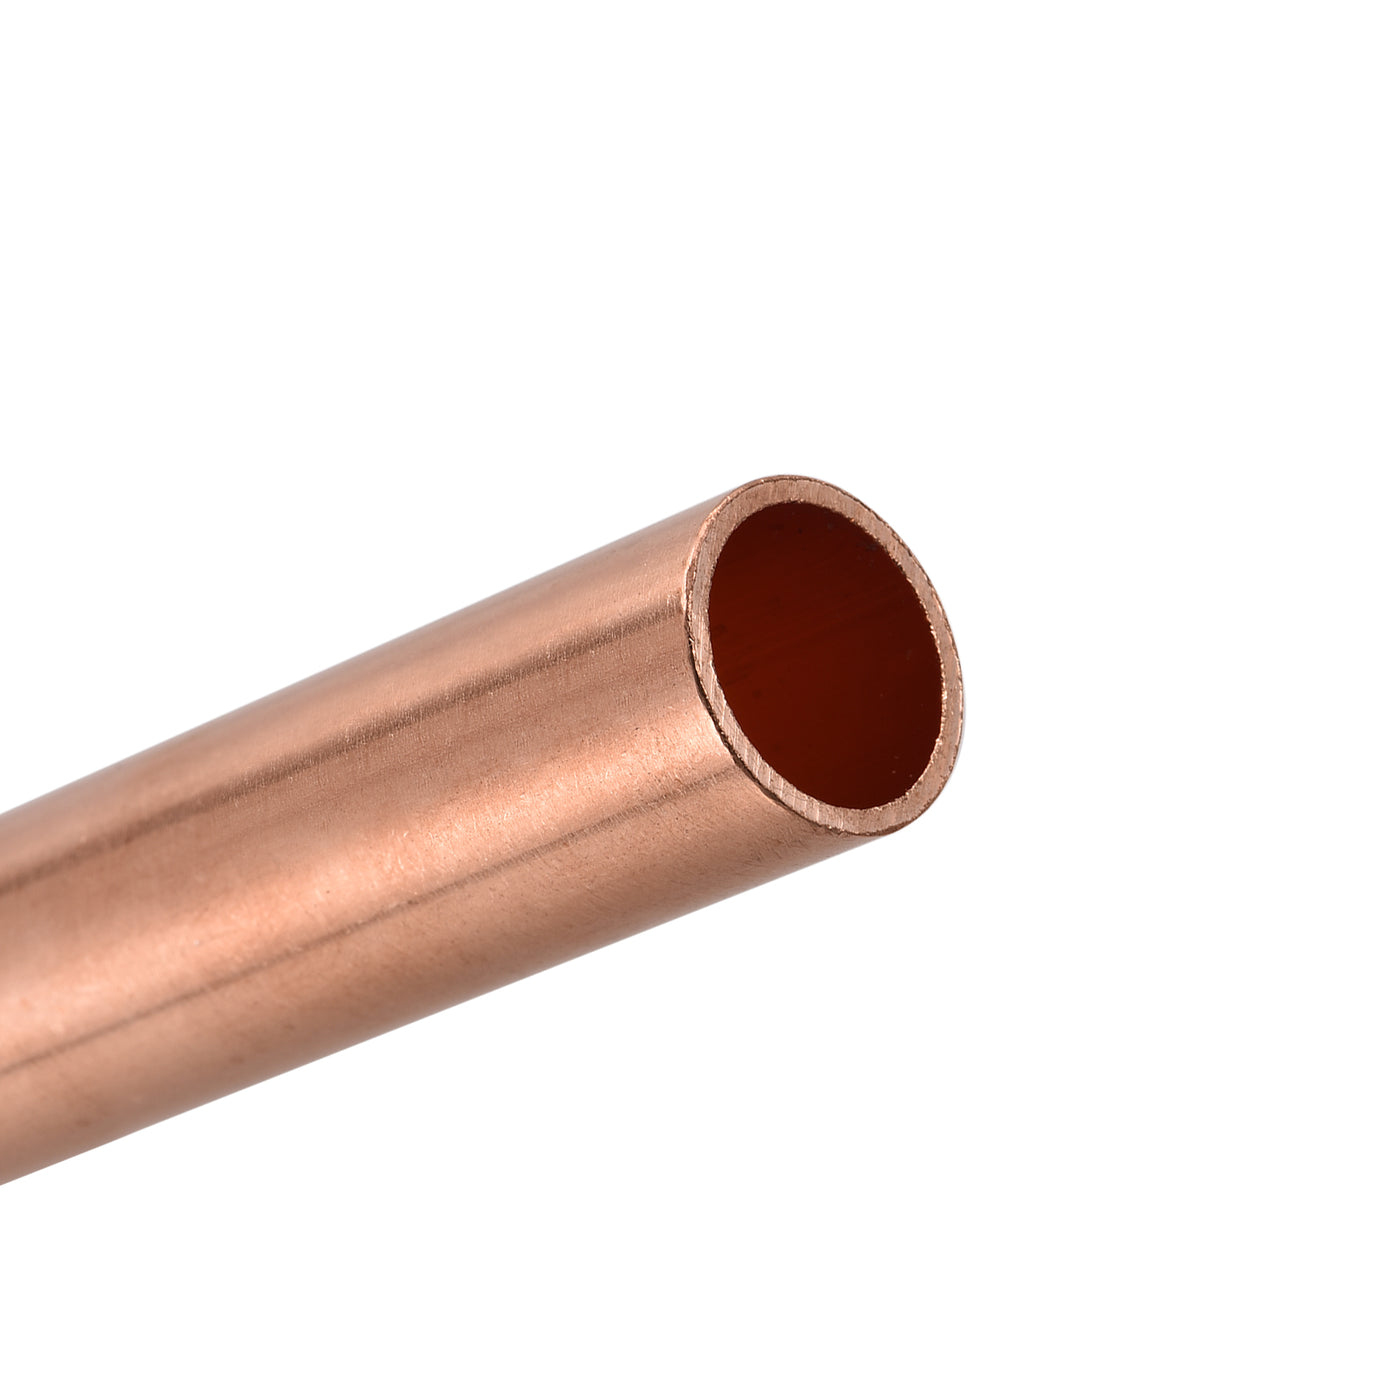 uxcell Uxcell Copper Round Tube 19mm OD 1.5mm Wall Thickness 100mm Length Pipe Tubing